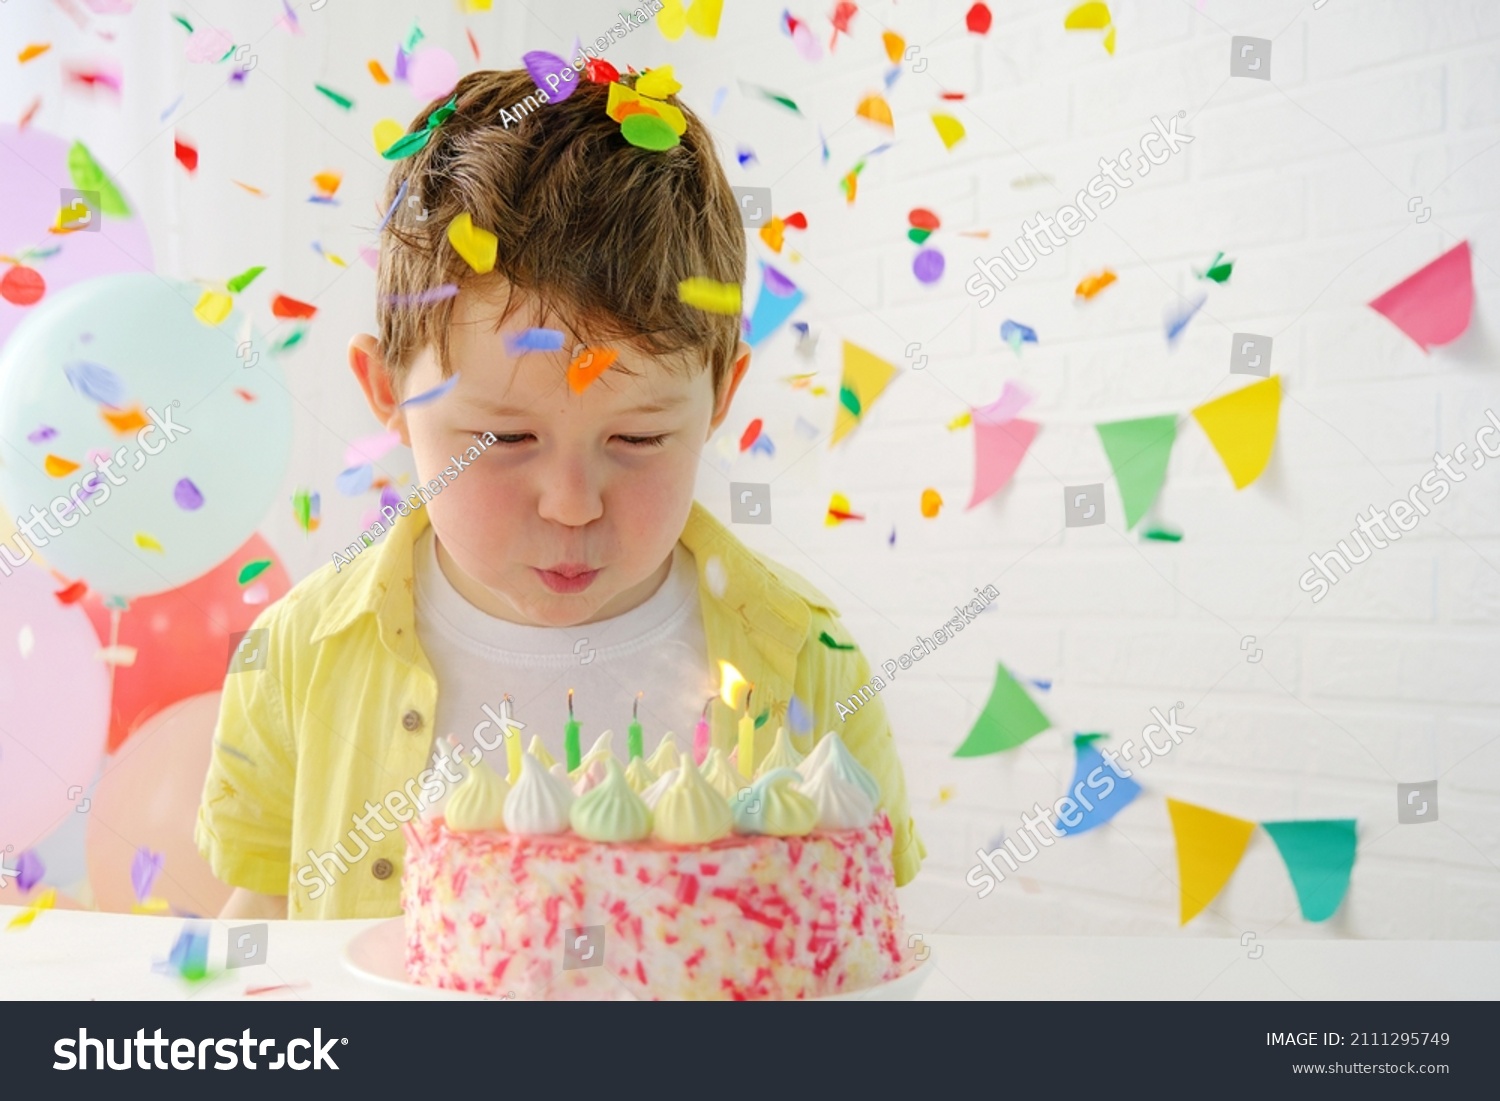 The child blows out the candles on the birthday cake. Boy 5 years old in a festive setting. Birthday, confetti fall on the boy. Horizontal photo. #2111295749